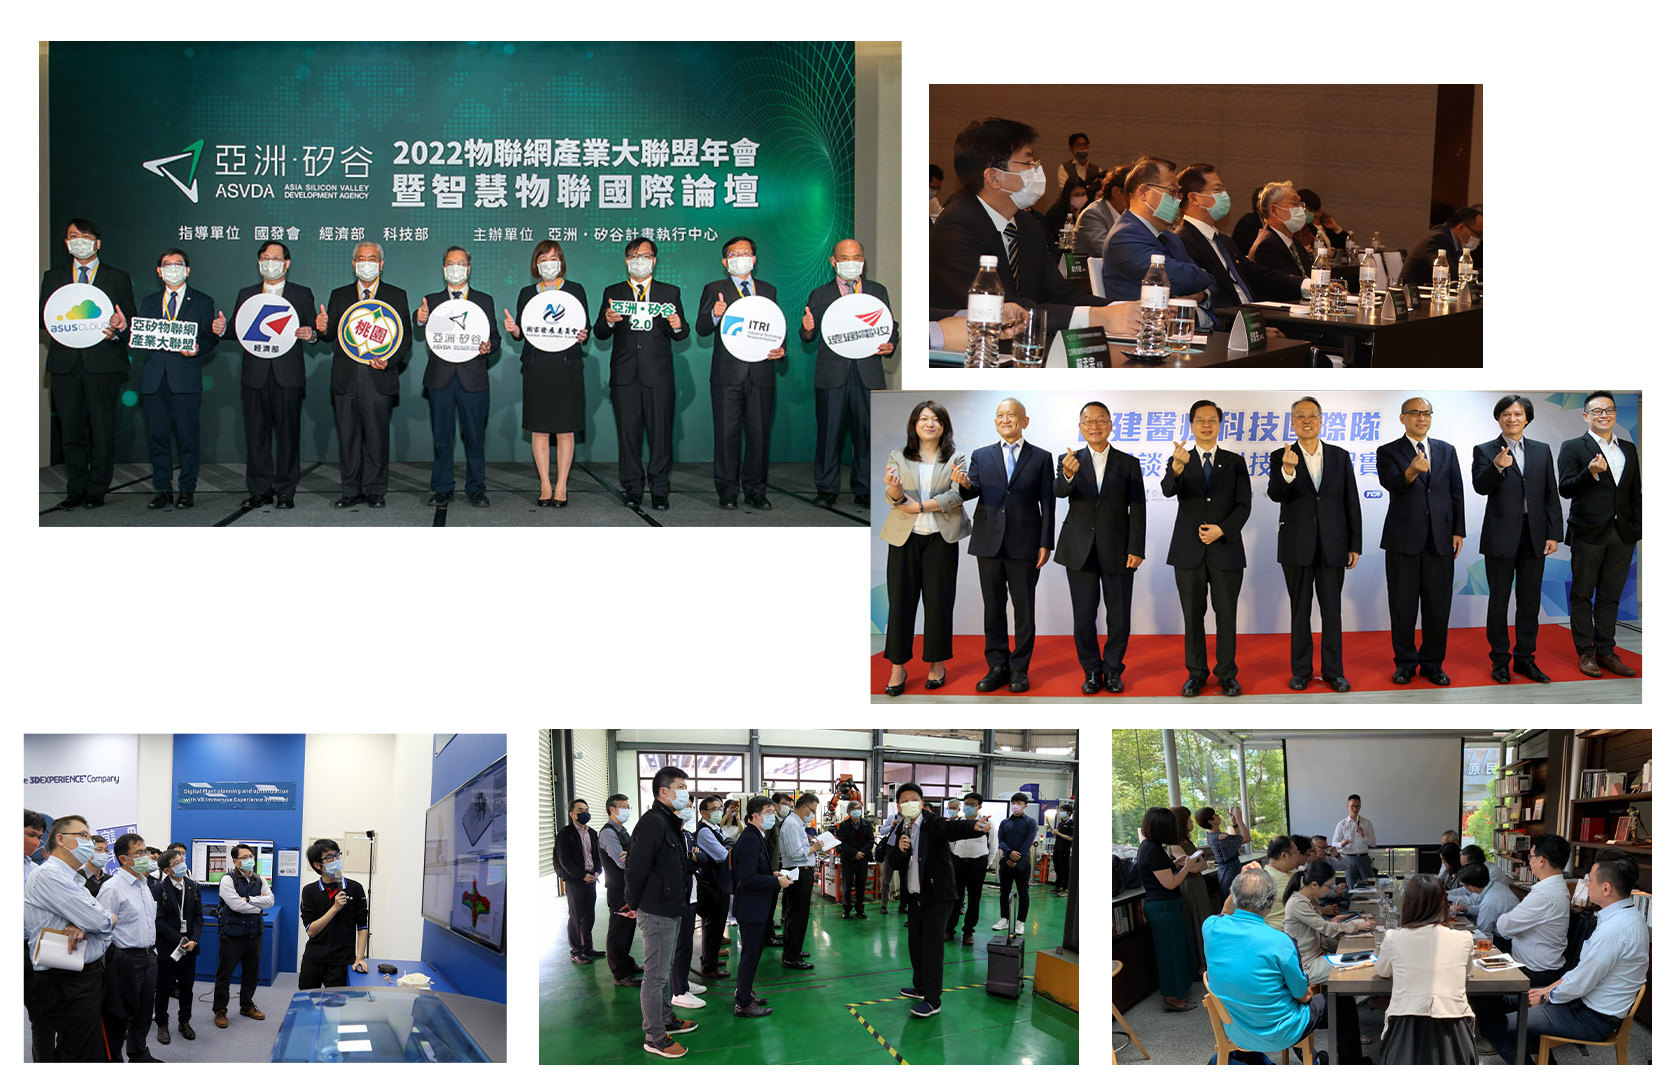 Actively promote industry cross-domain exchanges and cooperation, expand business opportunities, photos of related activities